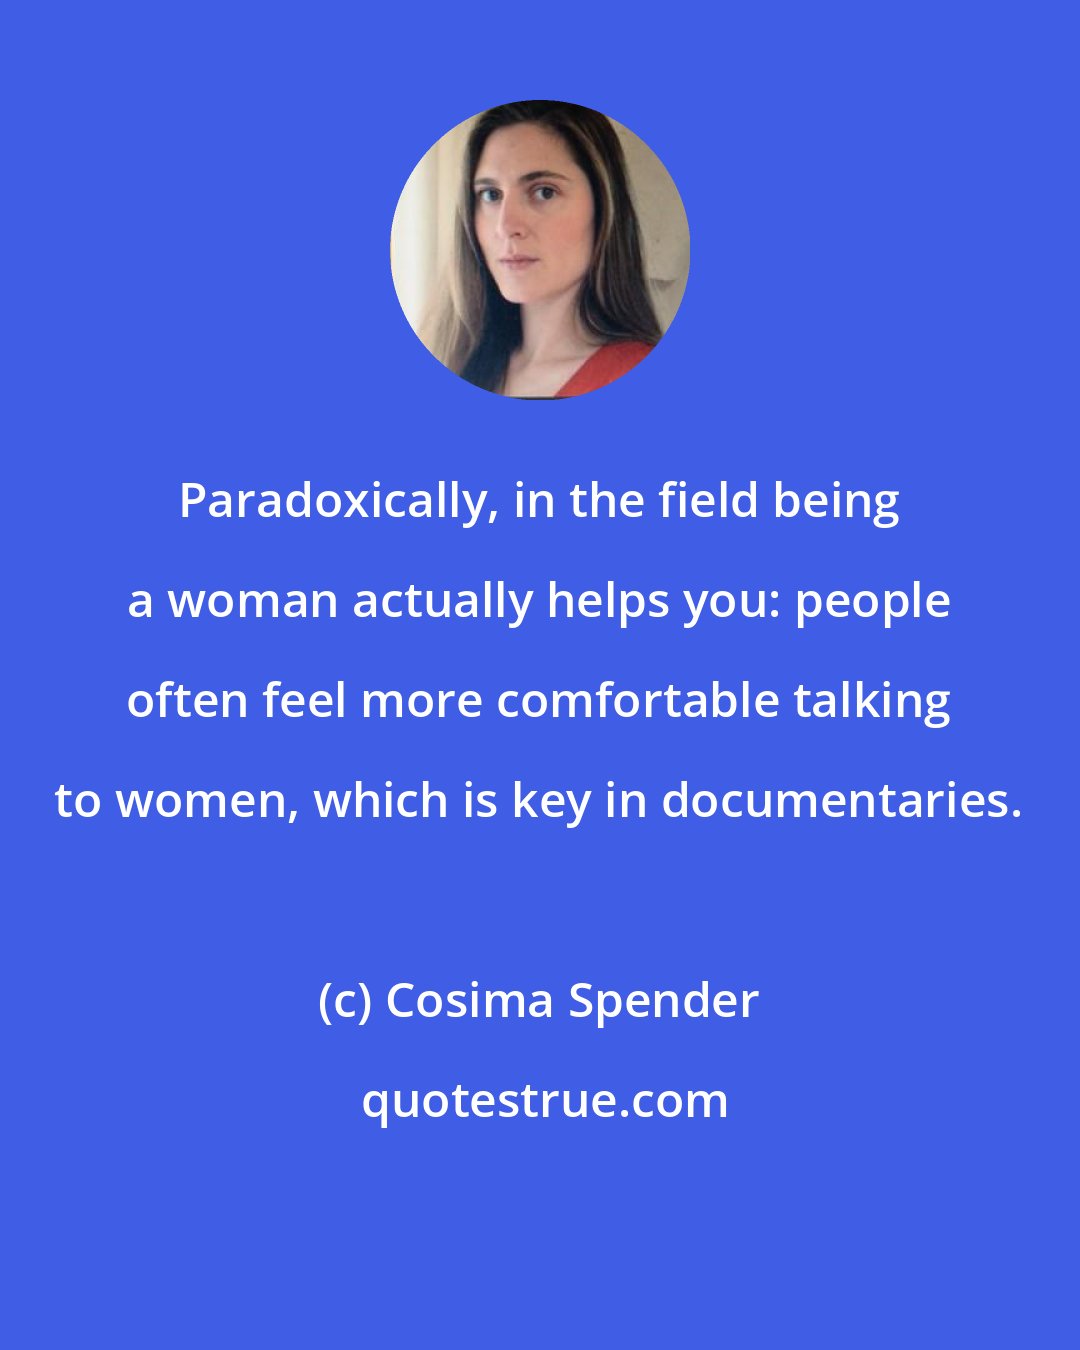 Cosima Spender: Paradoxically, in the field being a woman actually helps you: people often feel more comfortable talking to women, which is key in documentaries.